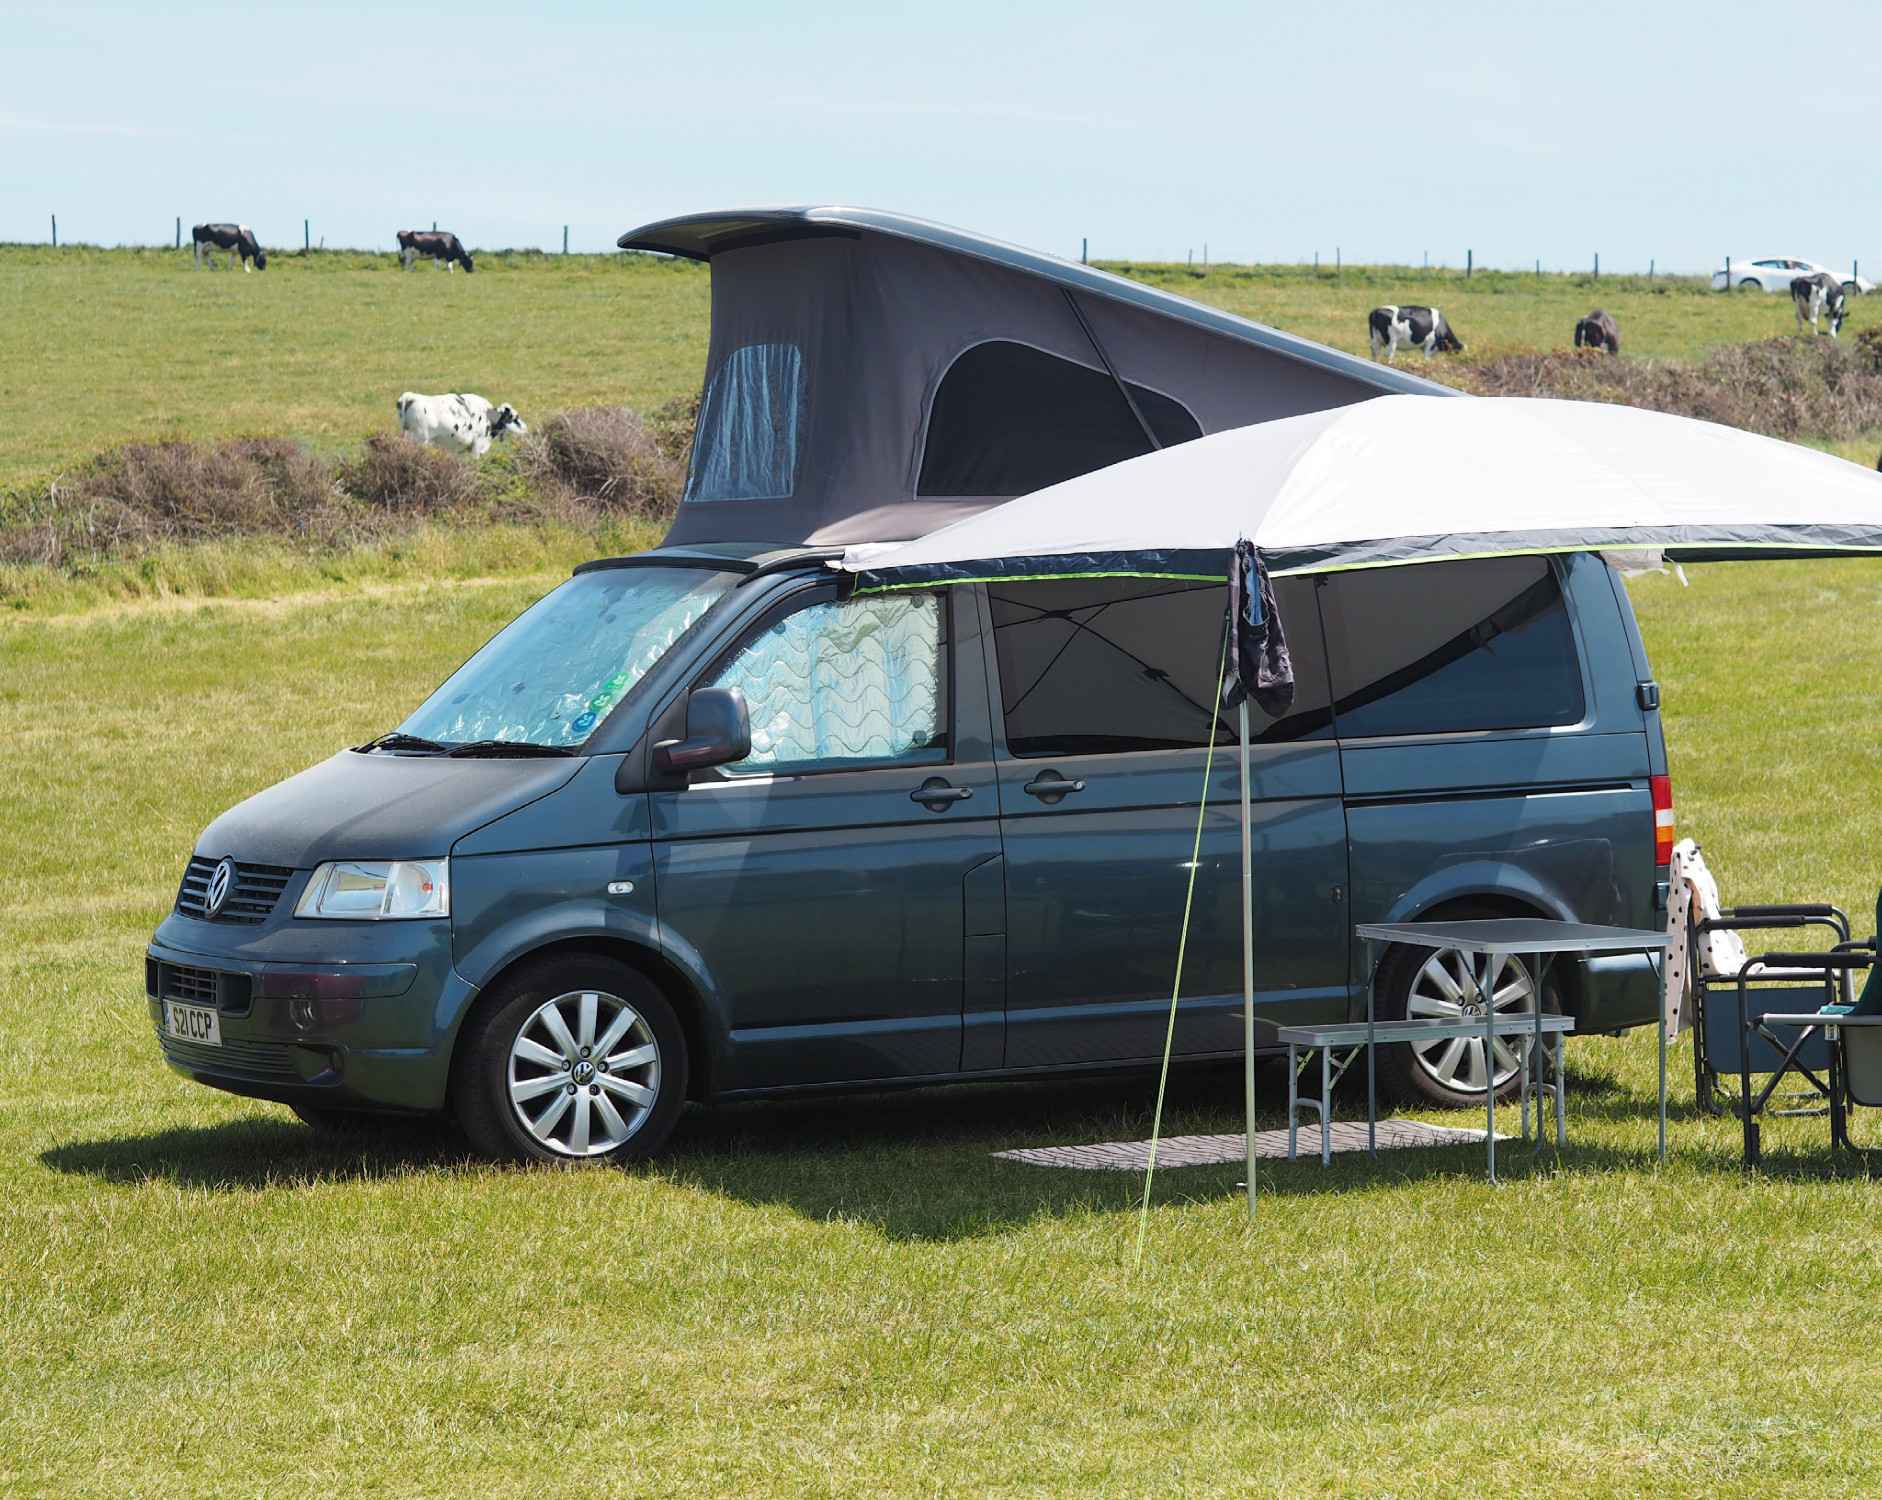 A VW T5 Campervan called Rosie and Reimo Sun Canopy with picnic set up for hire in South Croydon, England